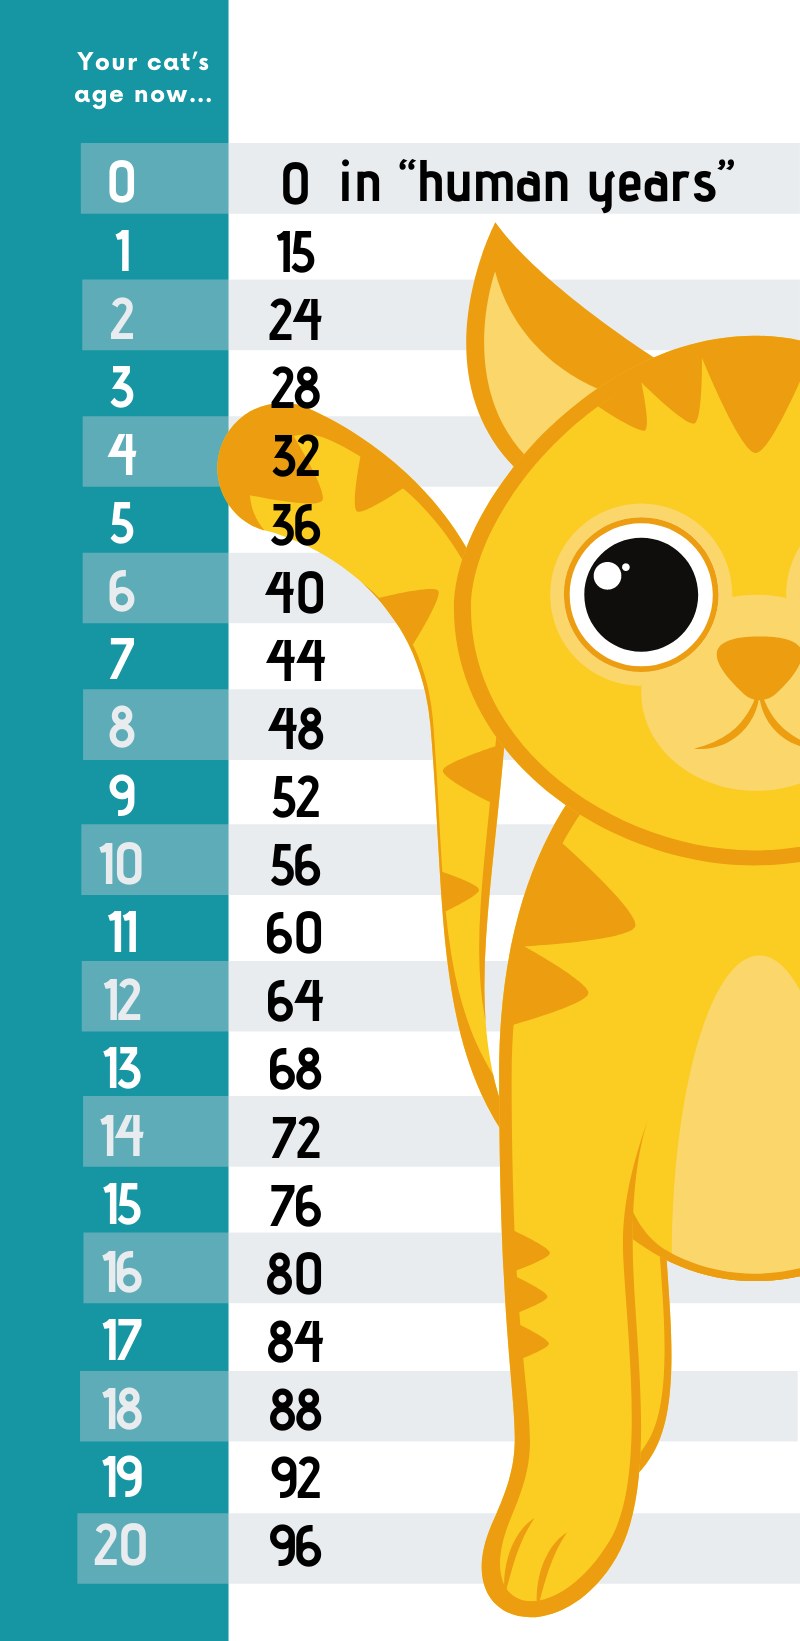 Calculate cat's age in human years